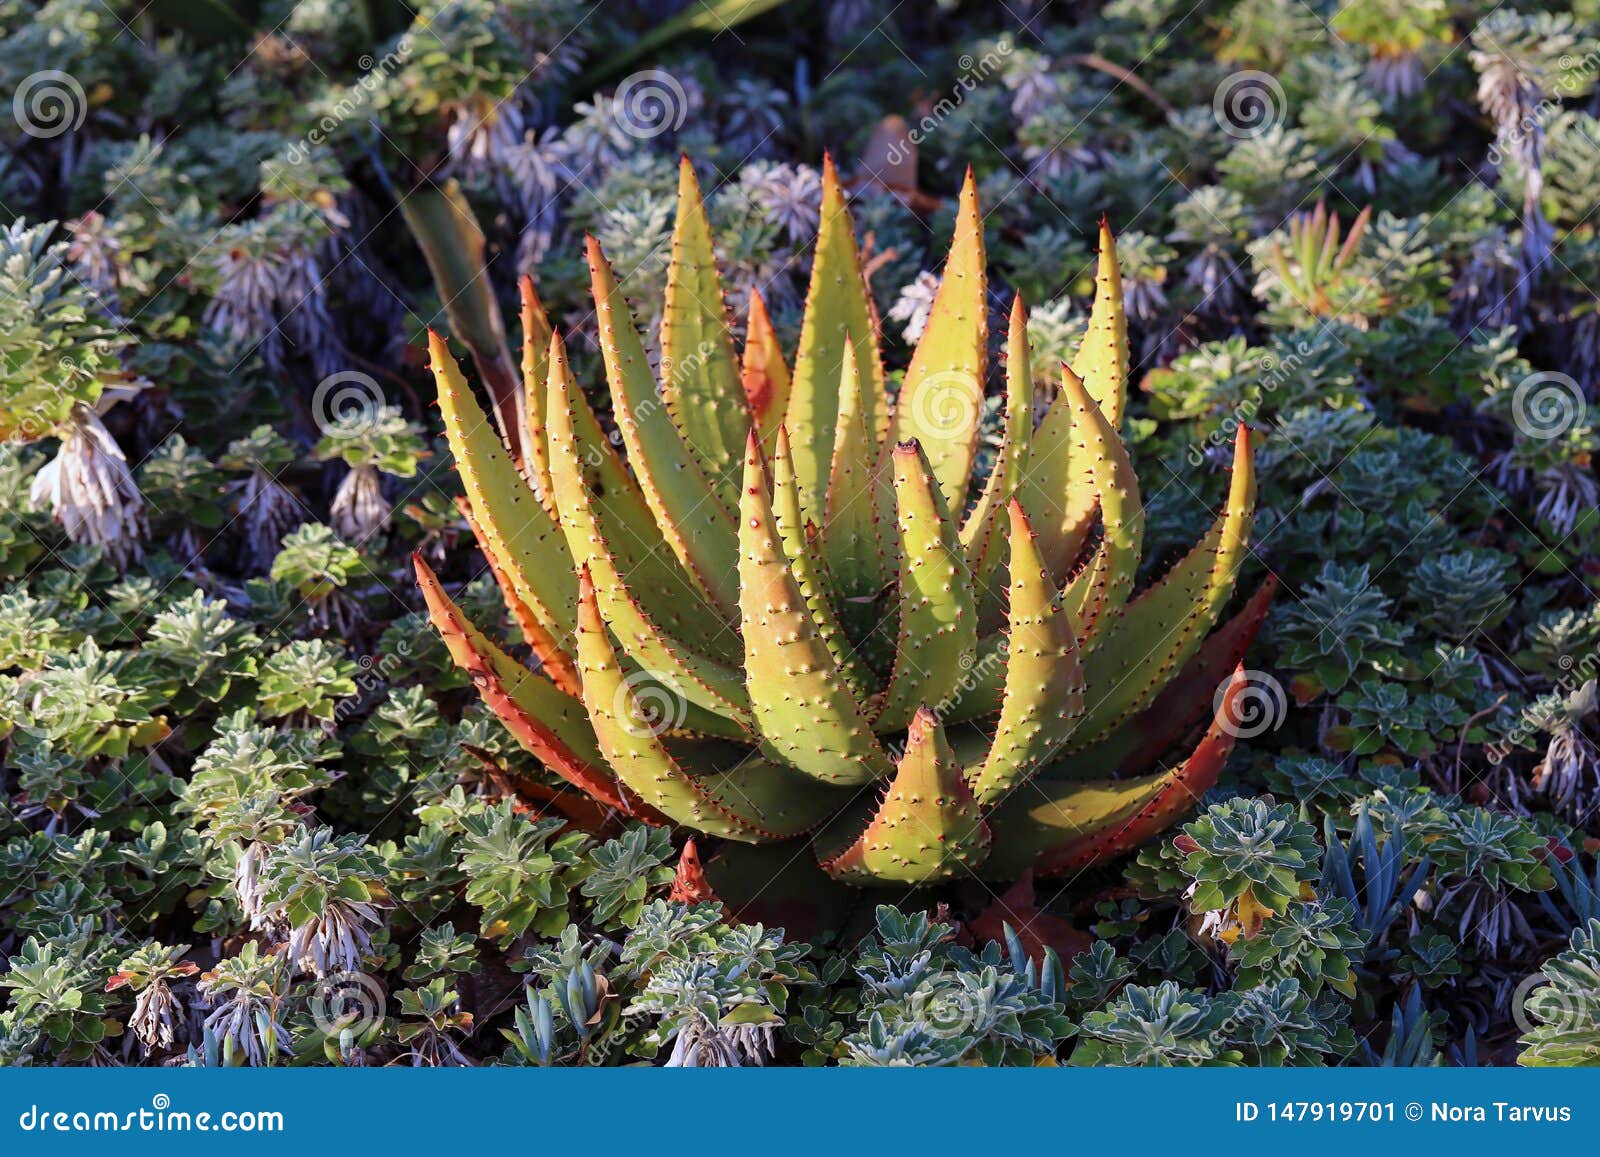 Colorful Aloe Vera Plants And Cacti In Madeira Stock Image Image